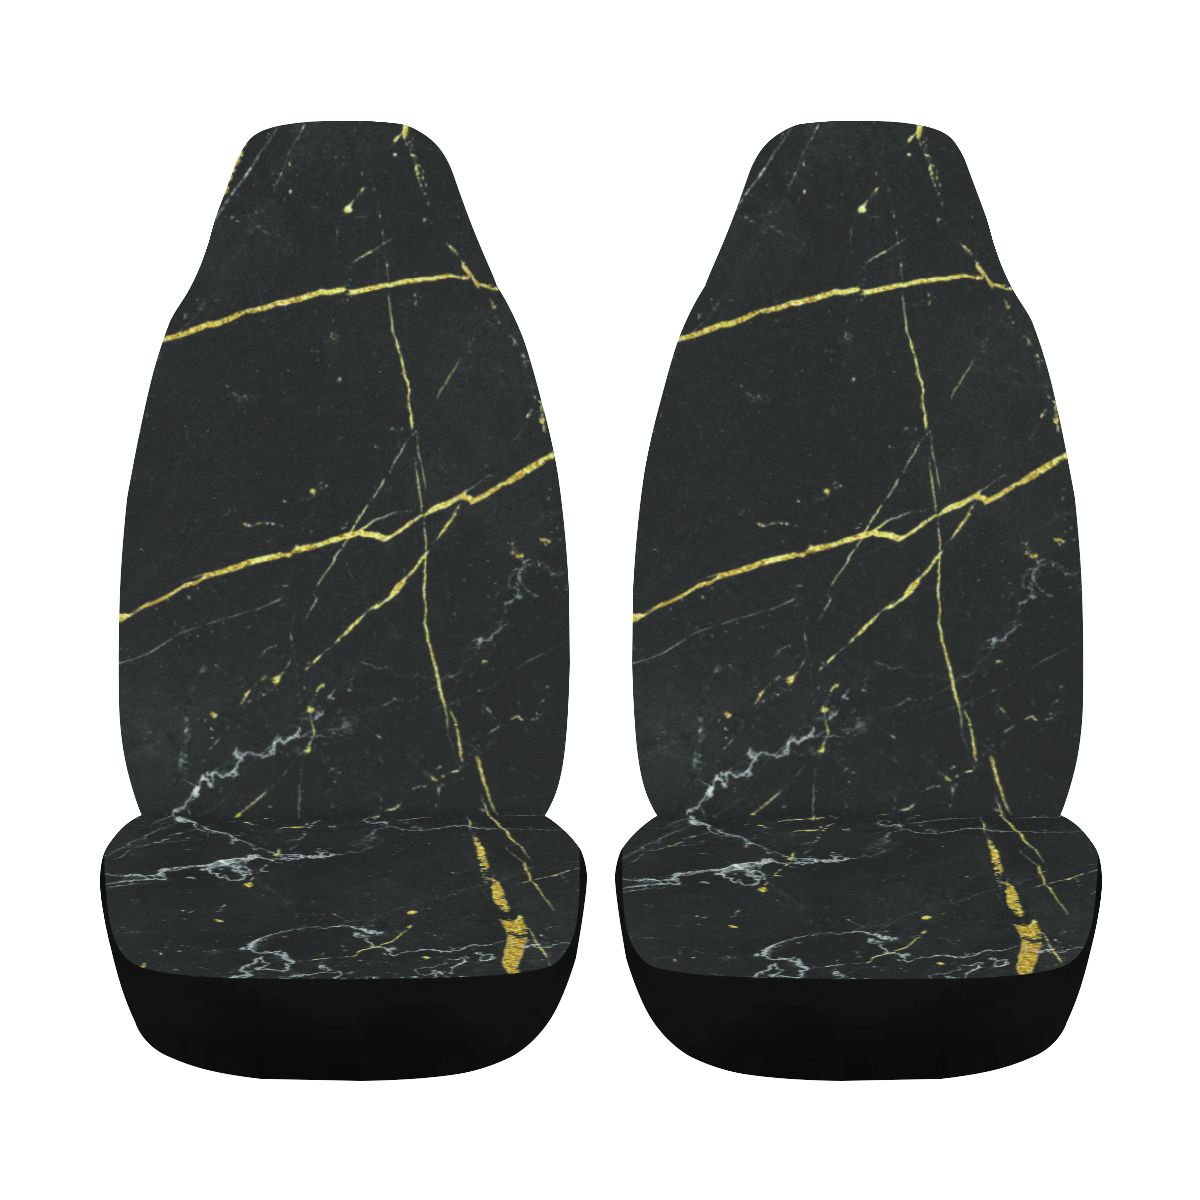 Dark Marble Design Car Seat Cover Airbag Compatible (Set of 2)